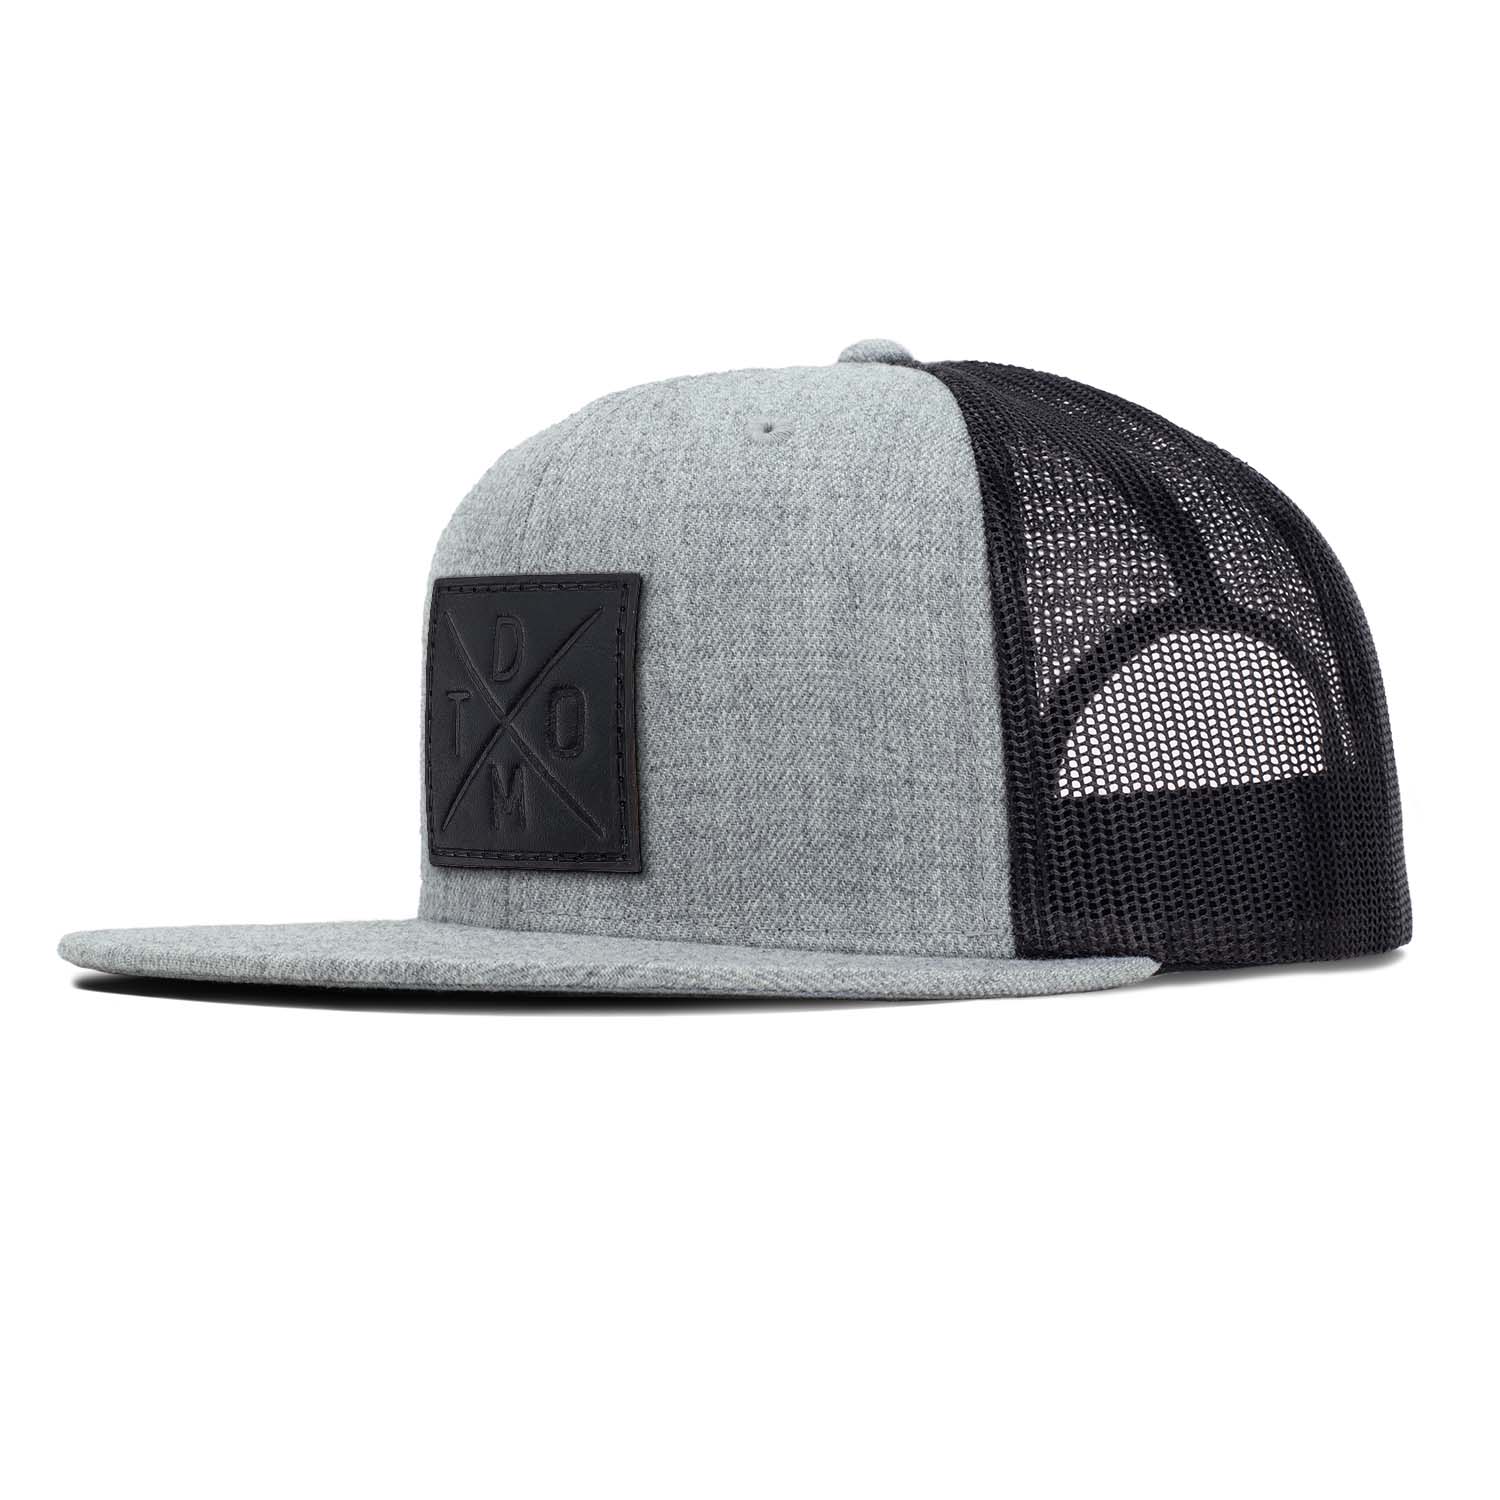 Black full grain leather debossed square DTOM patch on a heather gray flat bill hat with black mesh